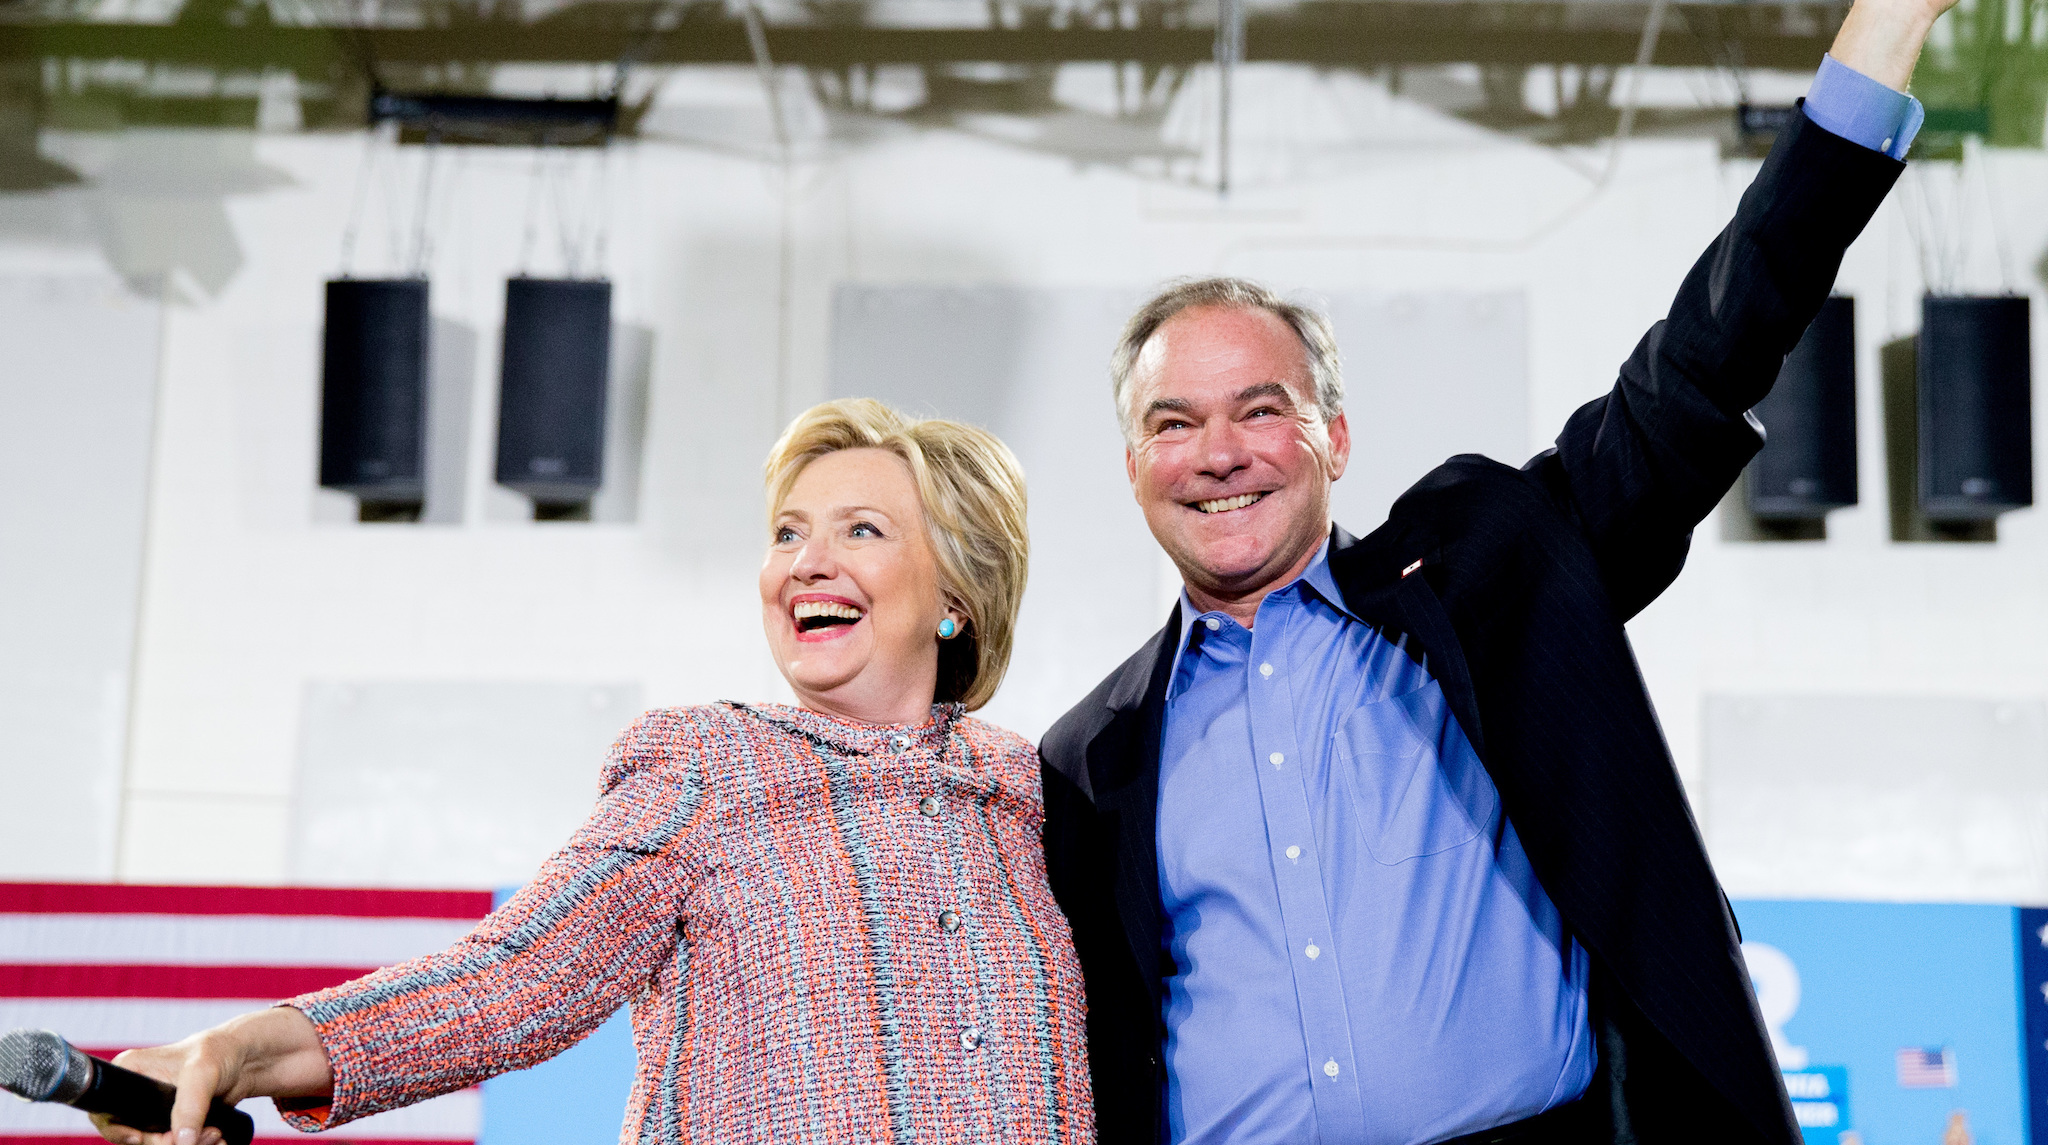 Hillary Clinton Selects Tim Kaine as Running Mate